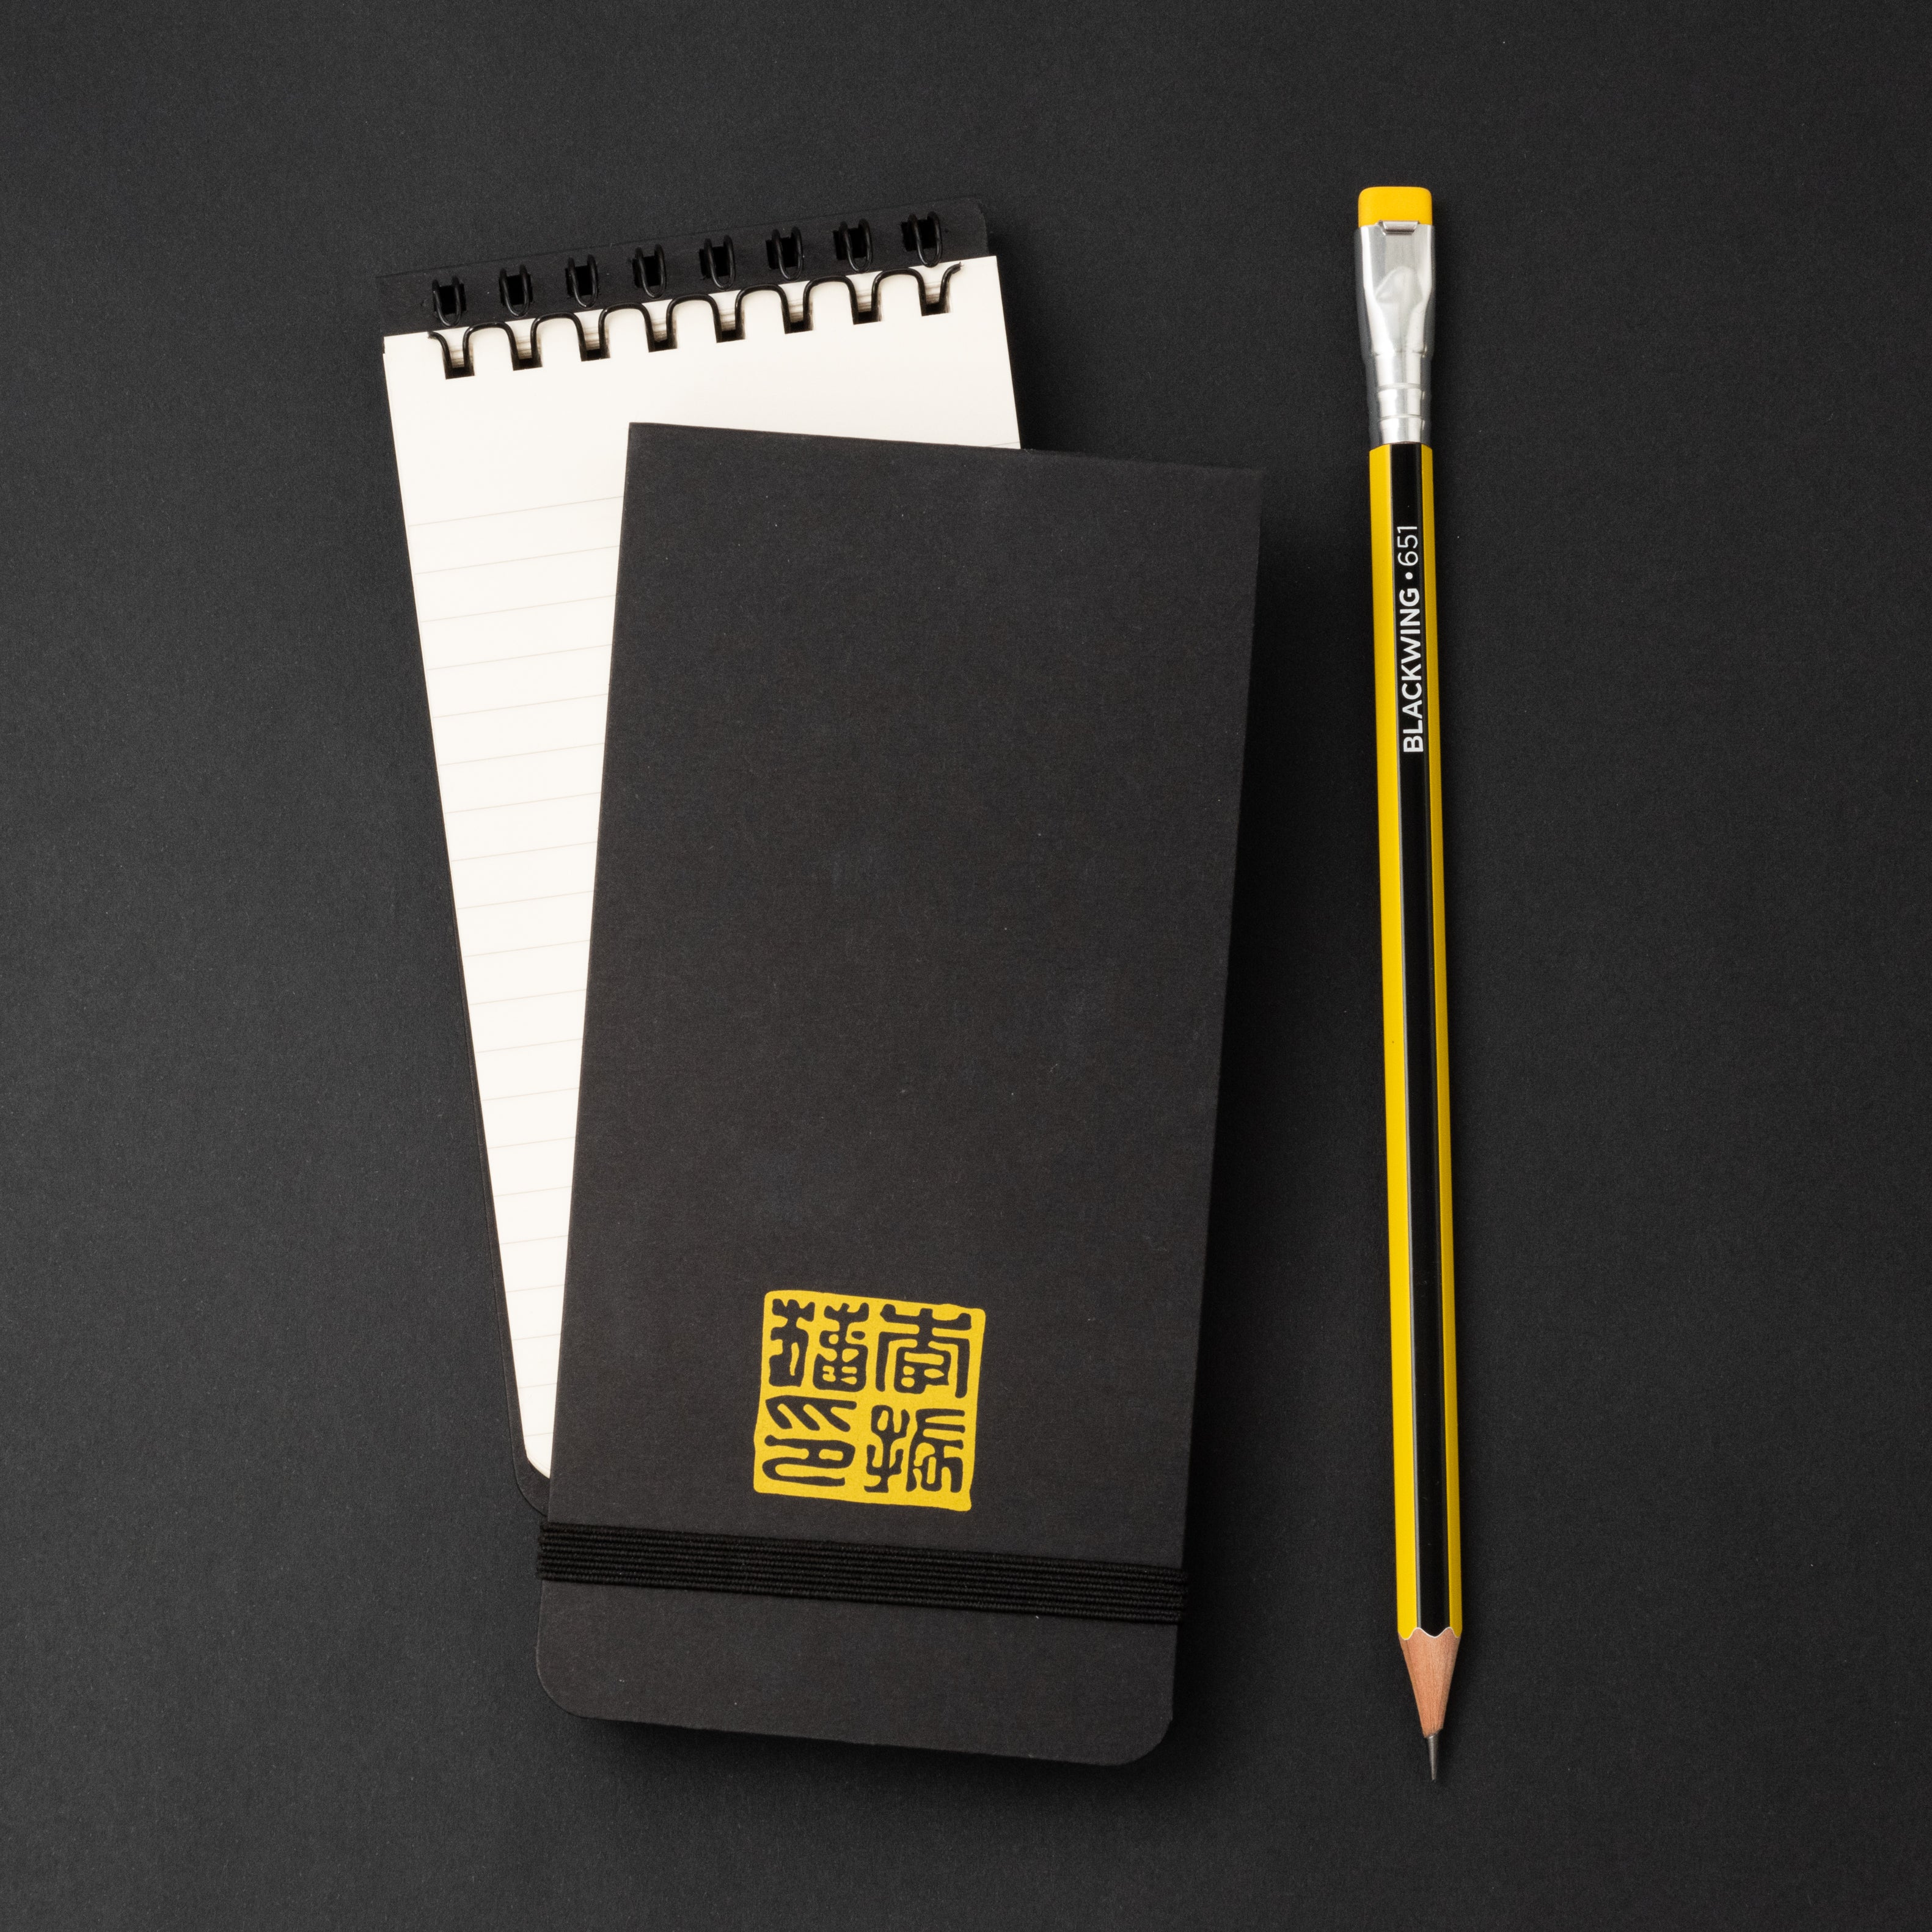 Blackwing Illegal Pad (2-Pk) - A New Take on the Legal Pad